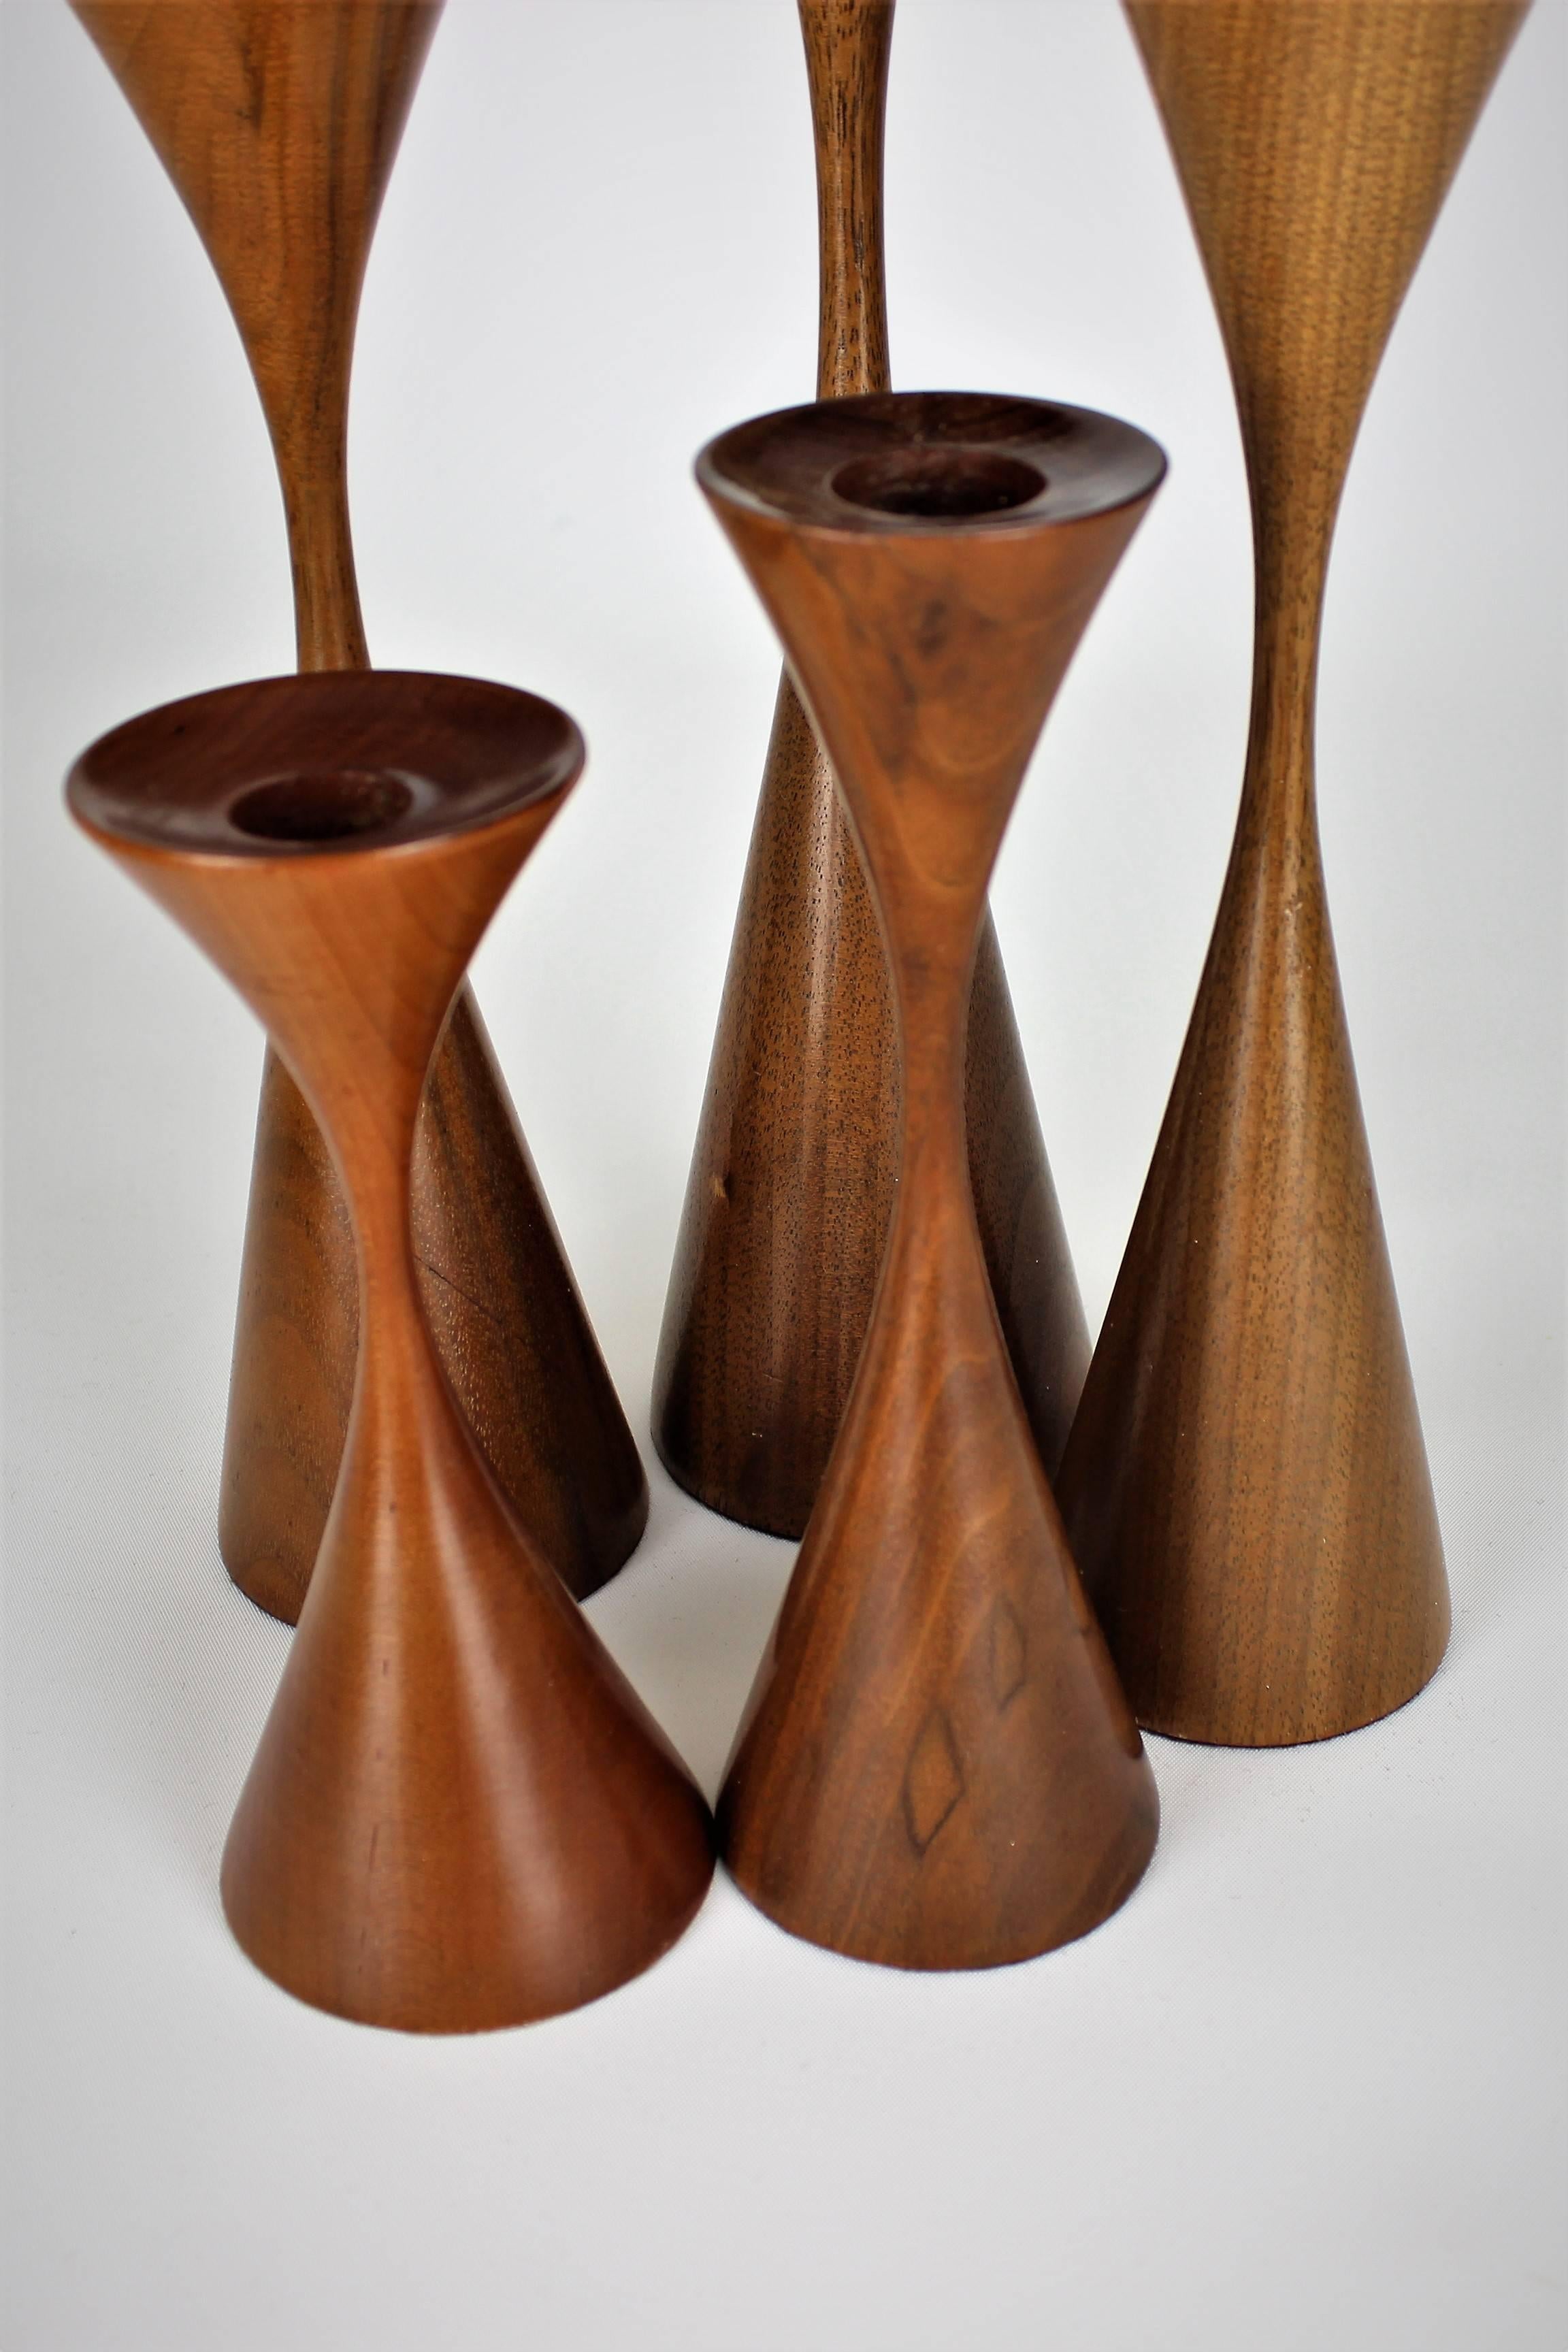 Grouping of five masterfully turned wood candlesticks by Rude Osolnik, 1970s. Height of these pieces range from 6" H to 12" H. This collection would make an excellent centrepiece or sculptural installation. Excellent condition. Osolnik was